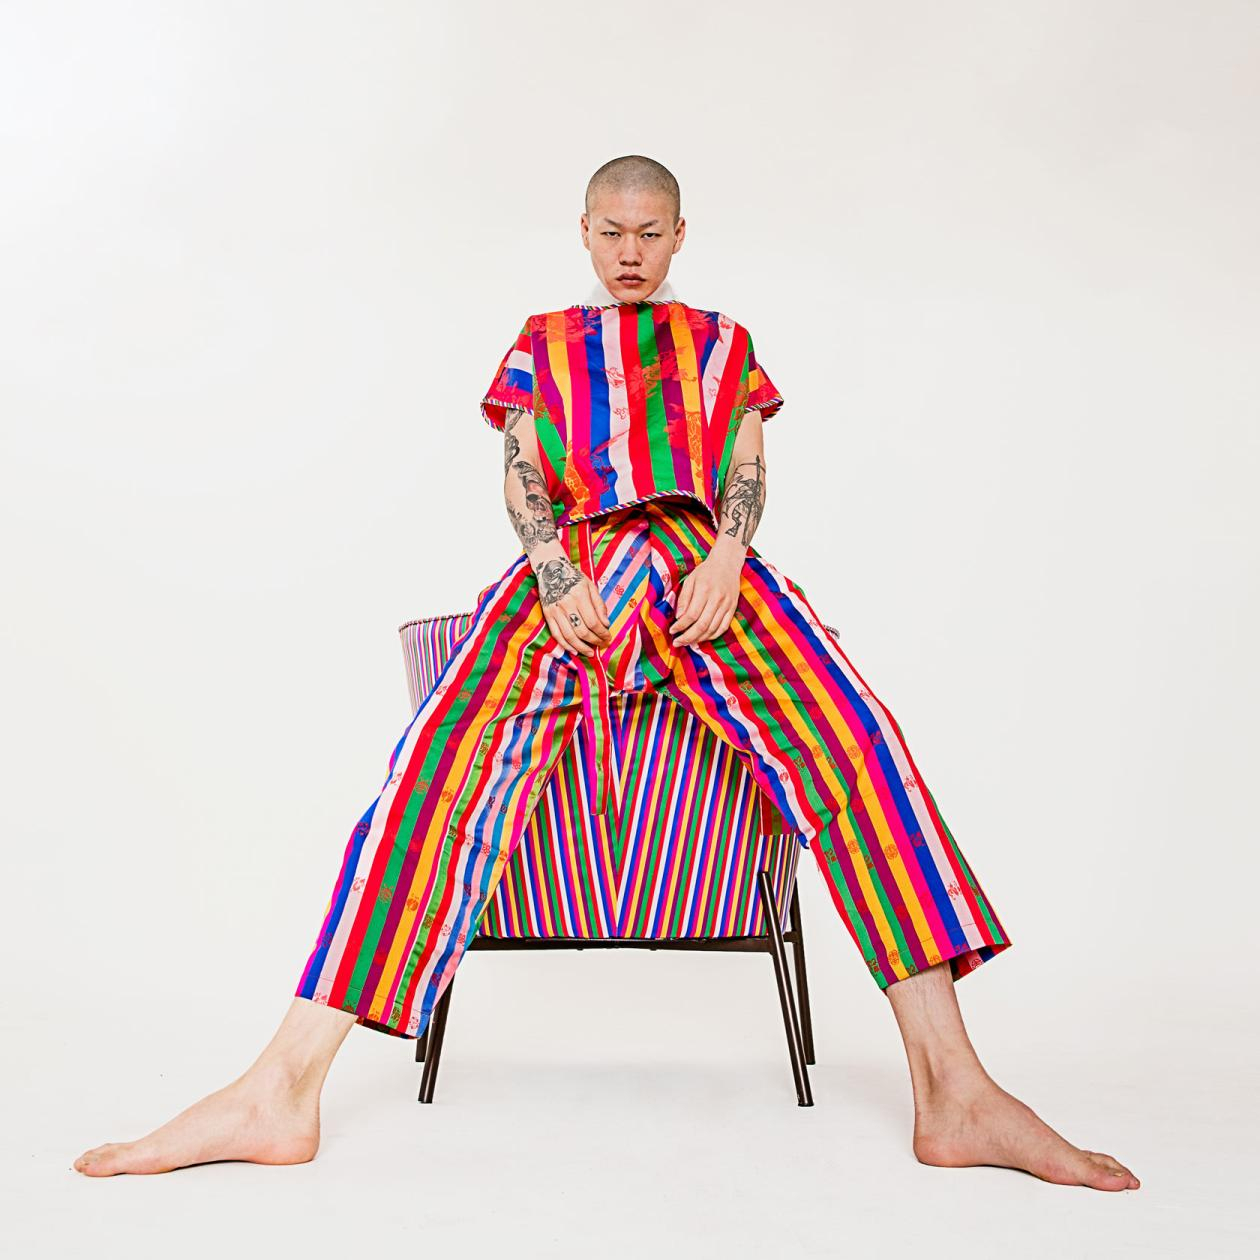 A “saekdong jeogori,” or multicolored striped jacket, designed by Lee Seung-ju in 2020. (Darcygom)